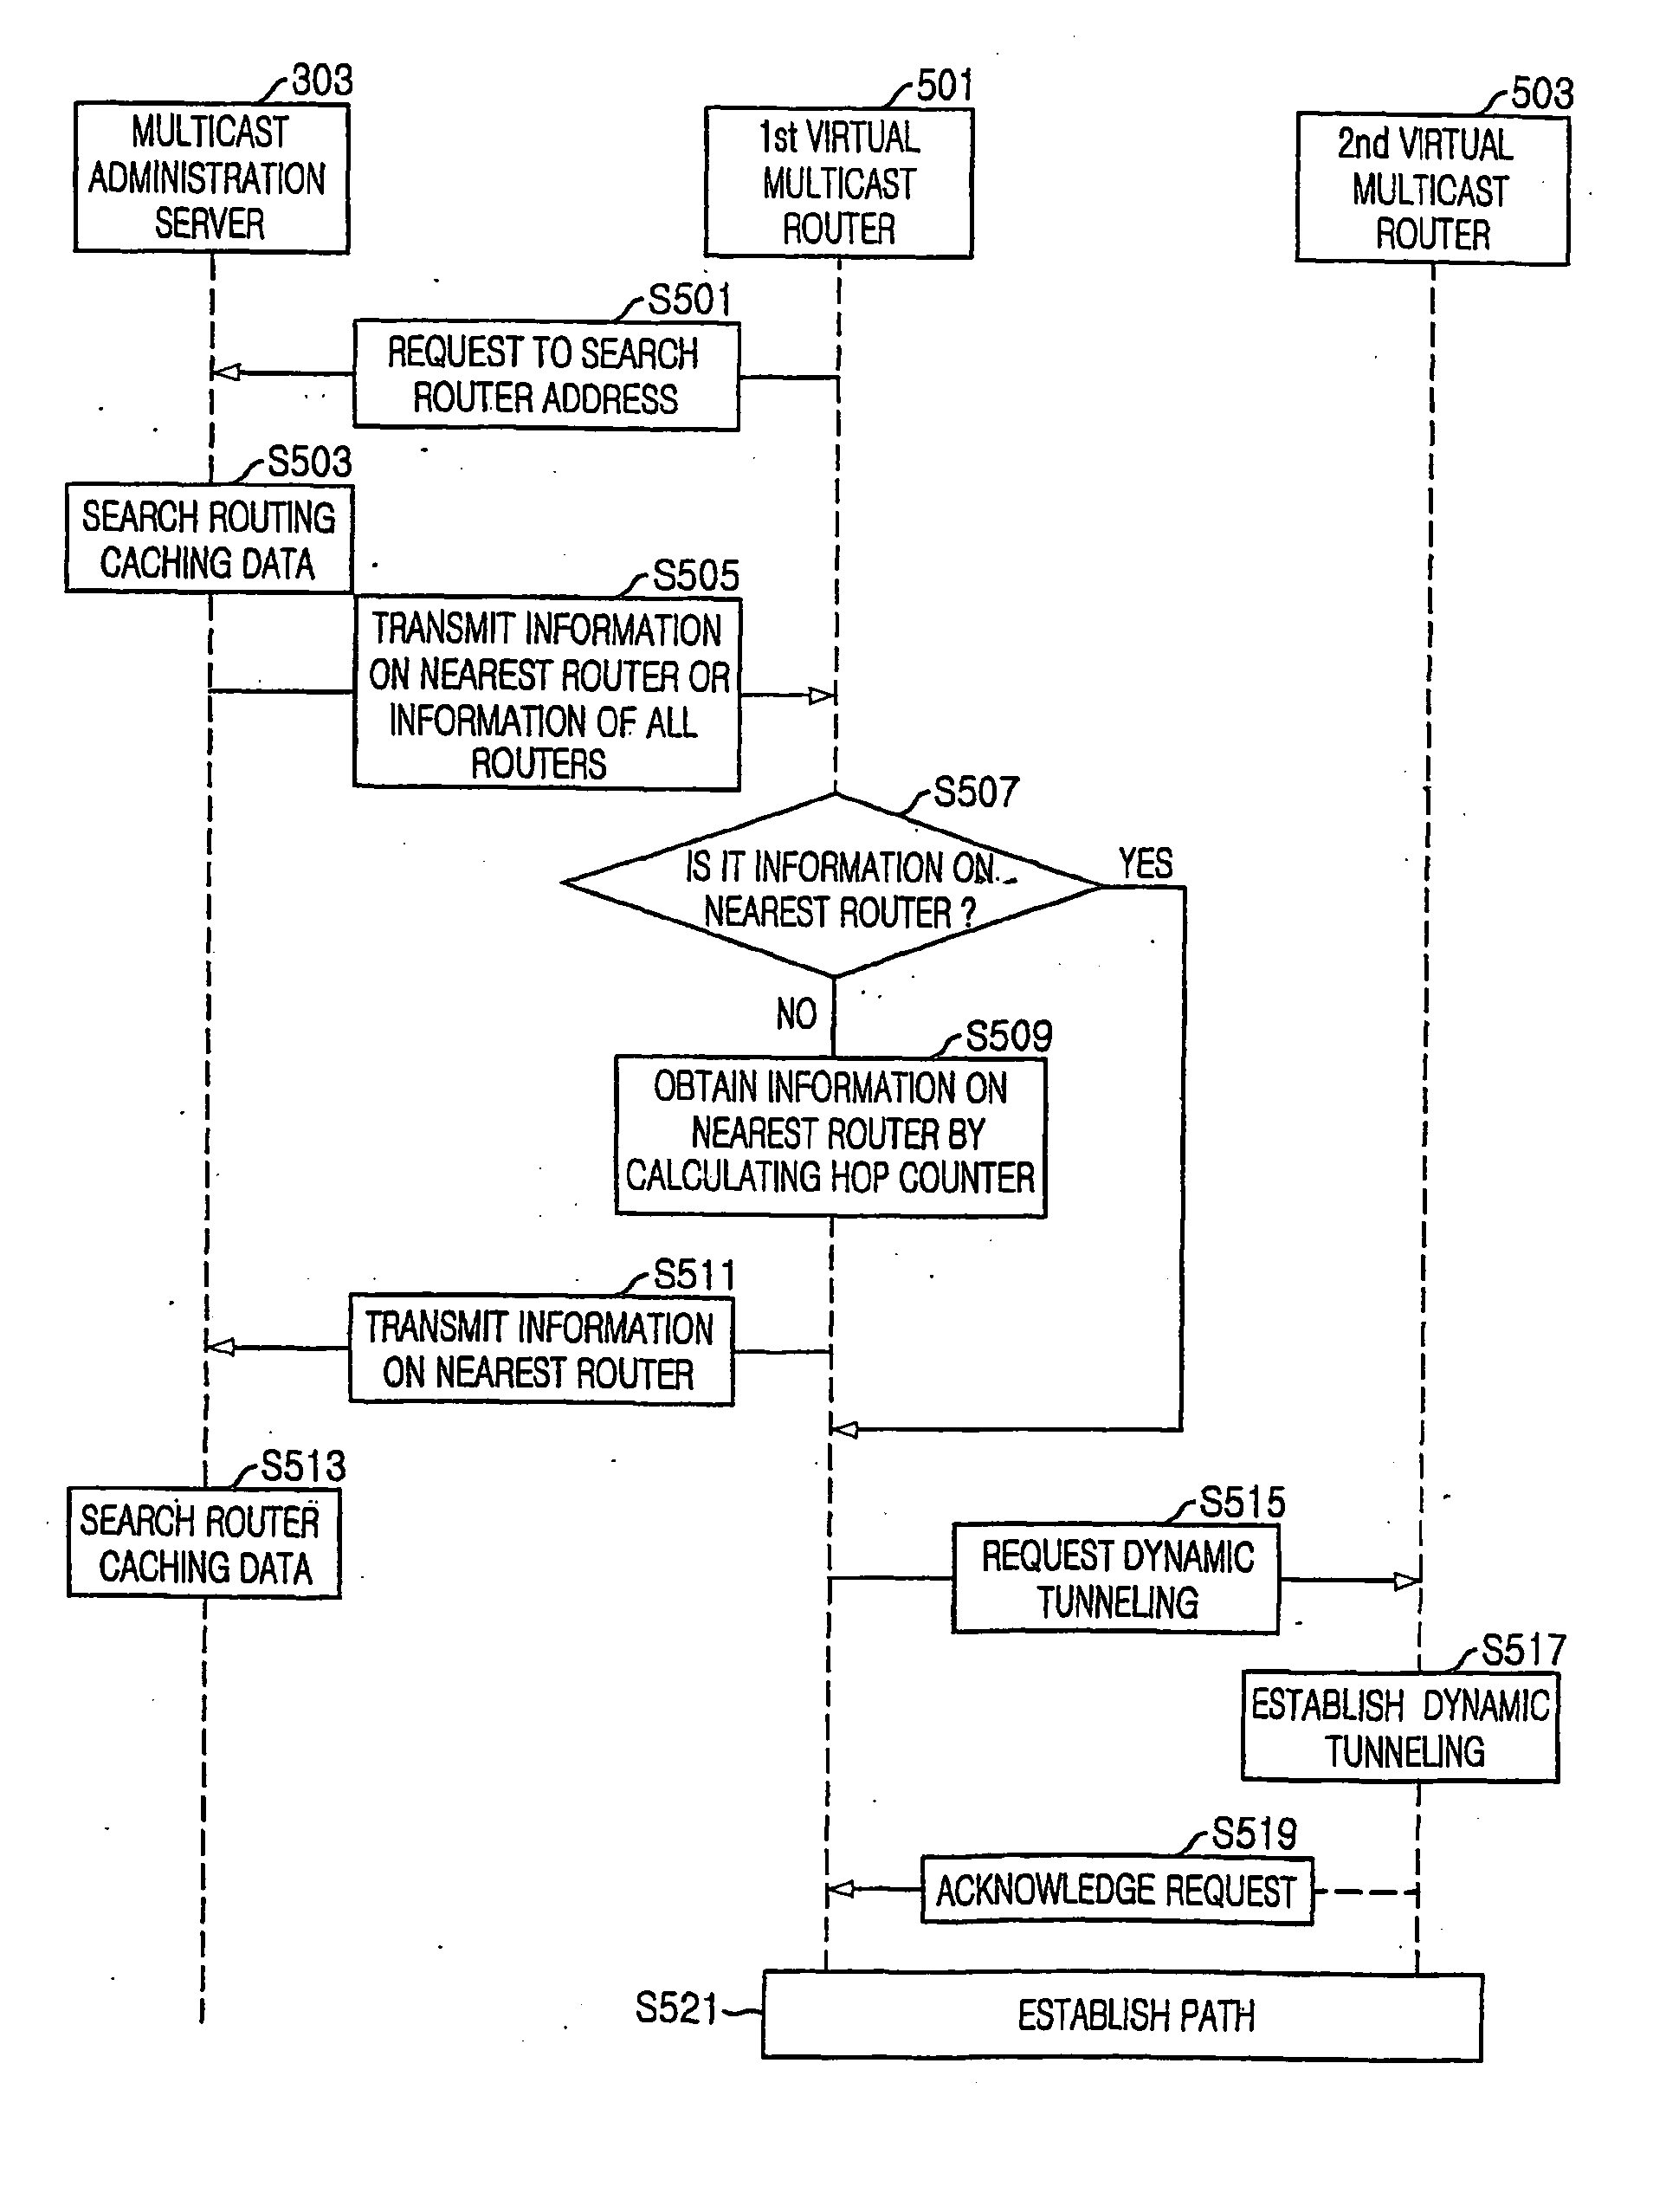 Method and system for virtual multicast networking